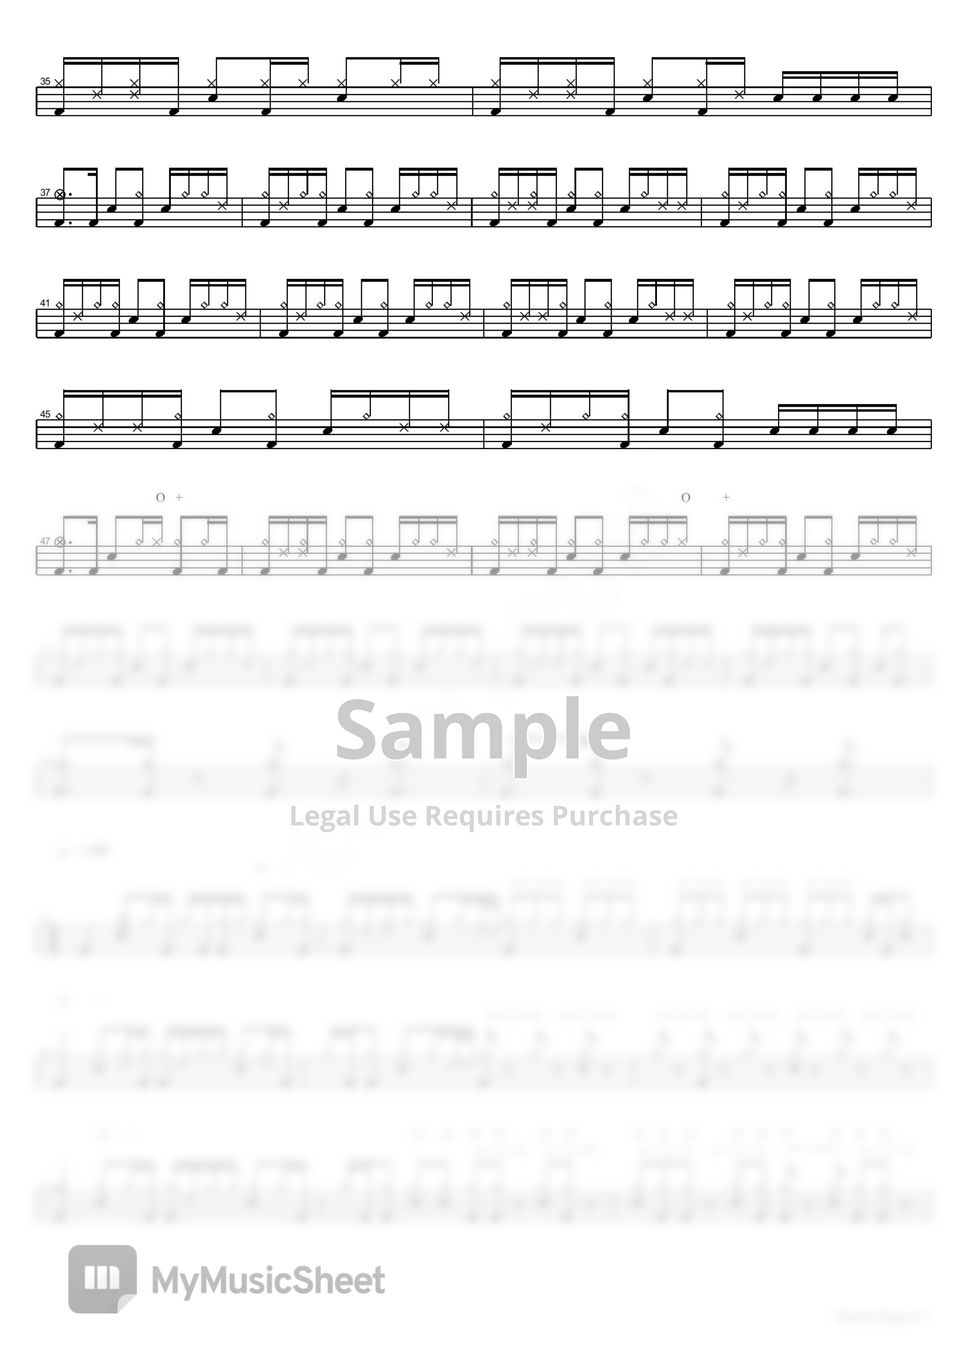 Ludwig Drums - 'Rambo' Sheets by COPYDRUM